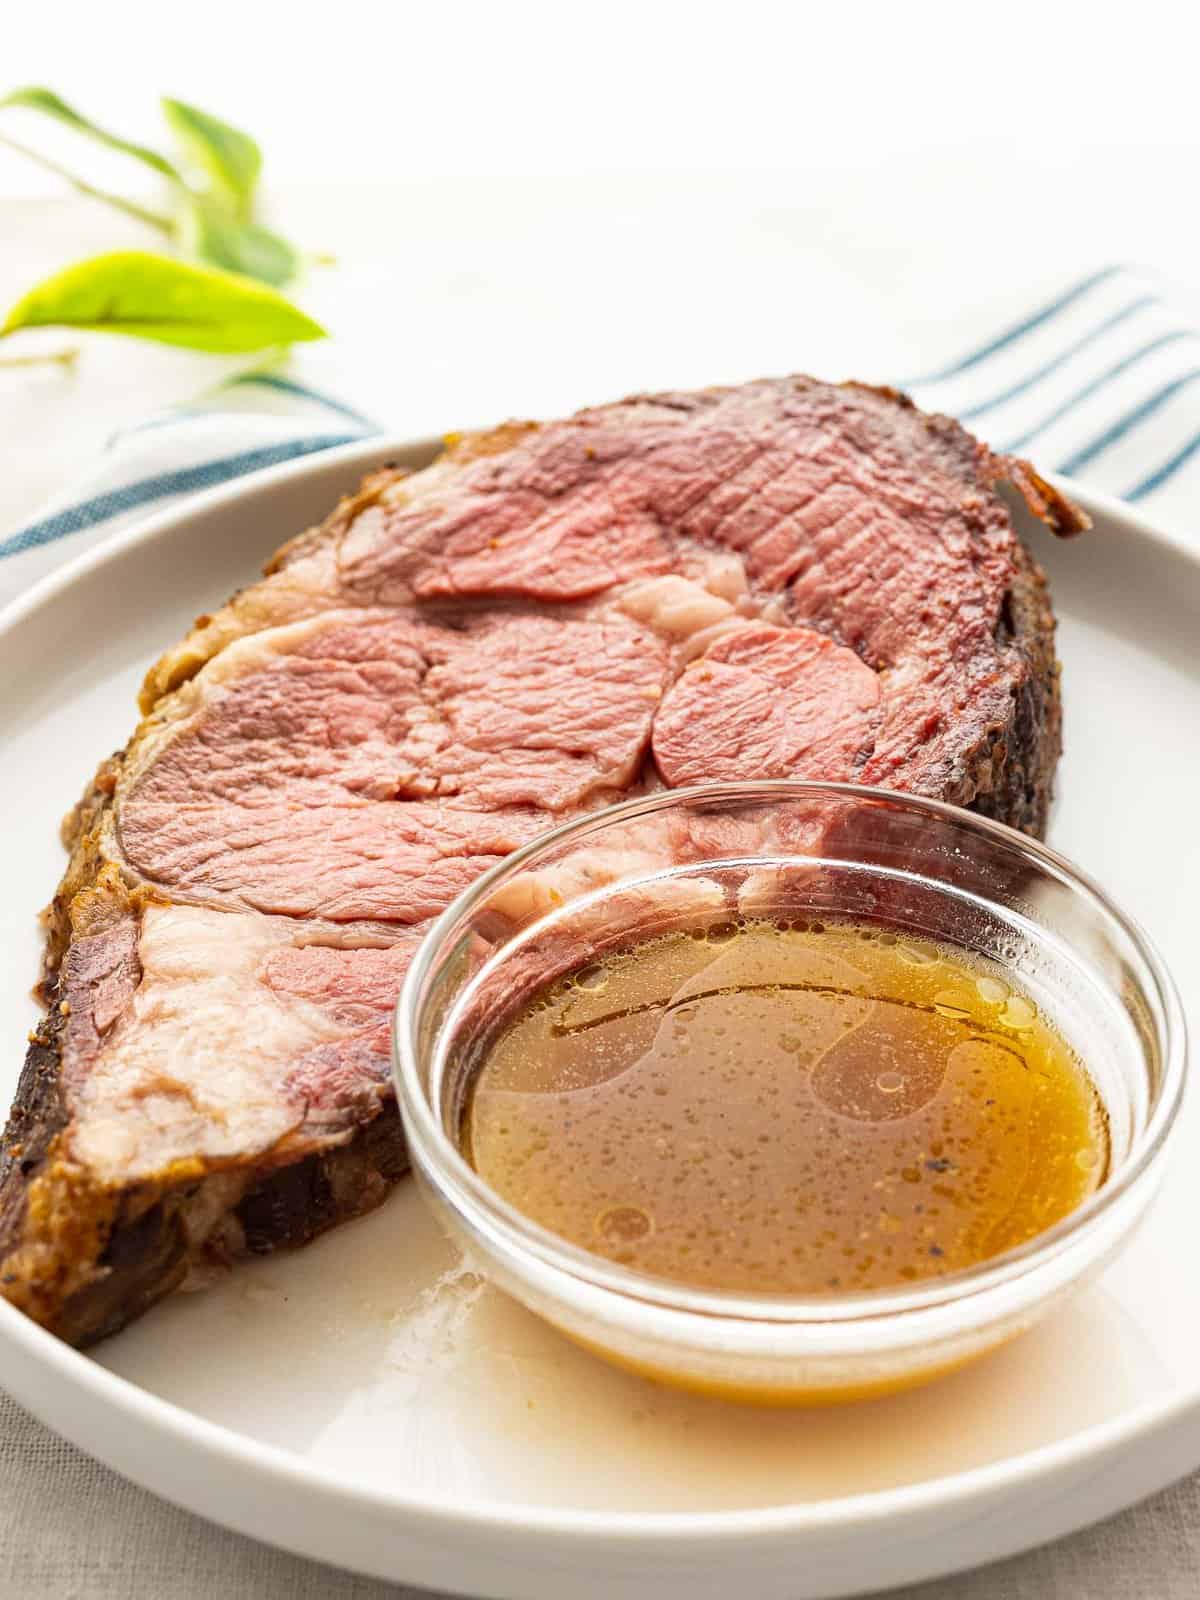 Au jus sauce placed on the side for dipping prime rib.